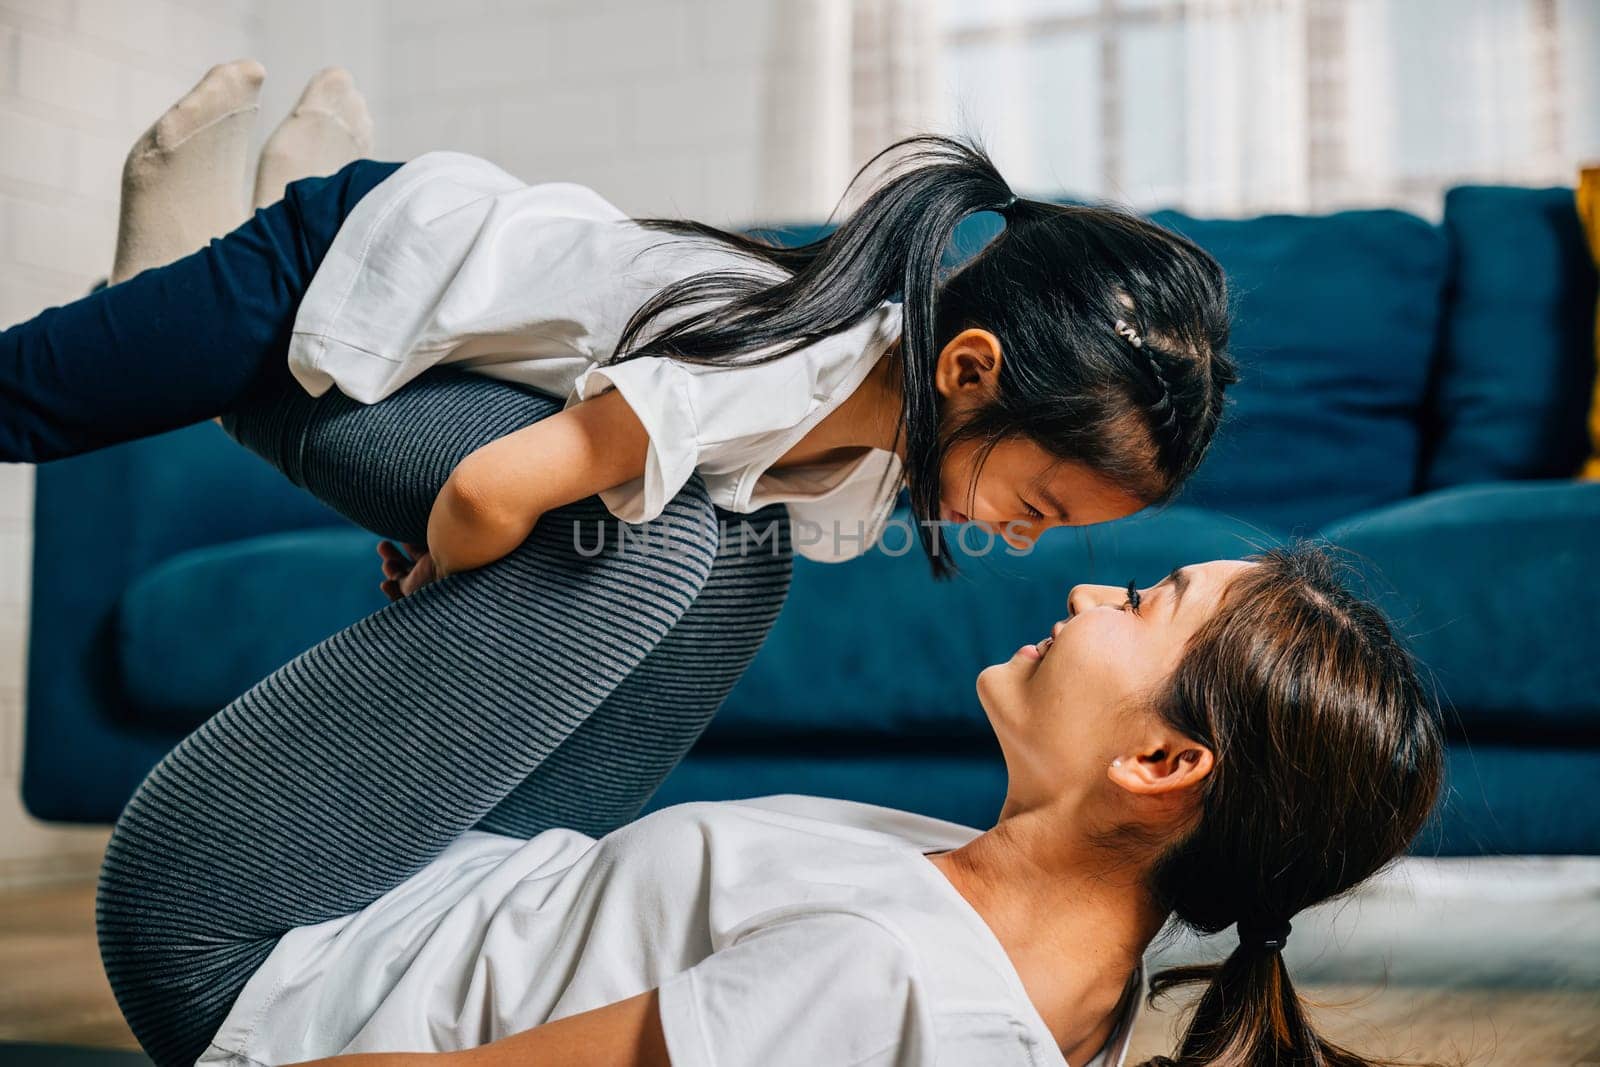 A mother and her child share a delightful family fitness moment playfully 'flying' like airplanes during their Pilates and yoga routine fostering trust harmony and happiness.